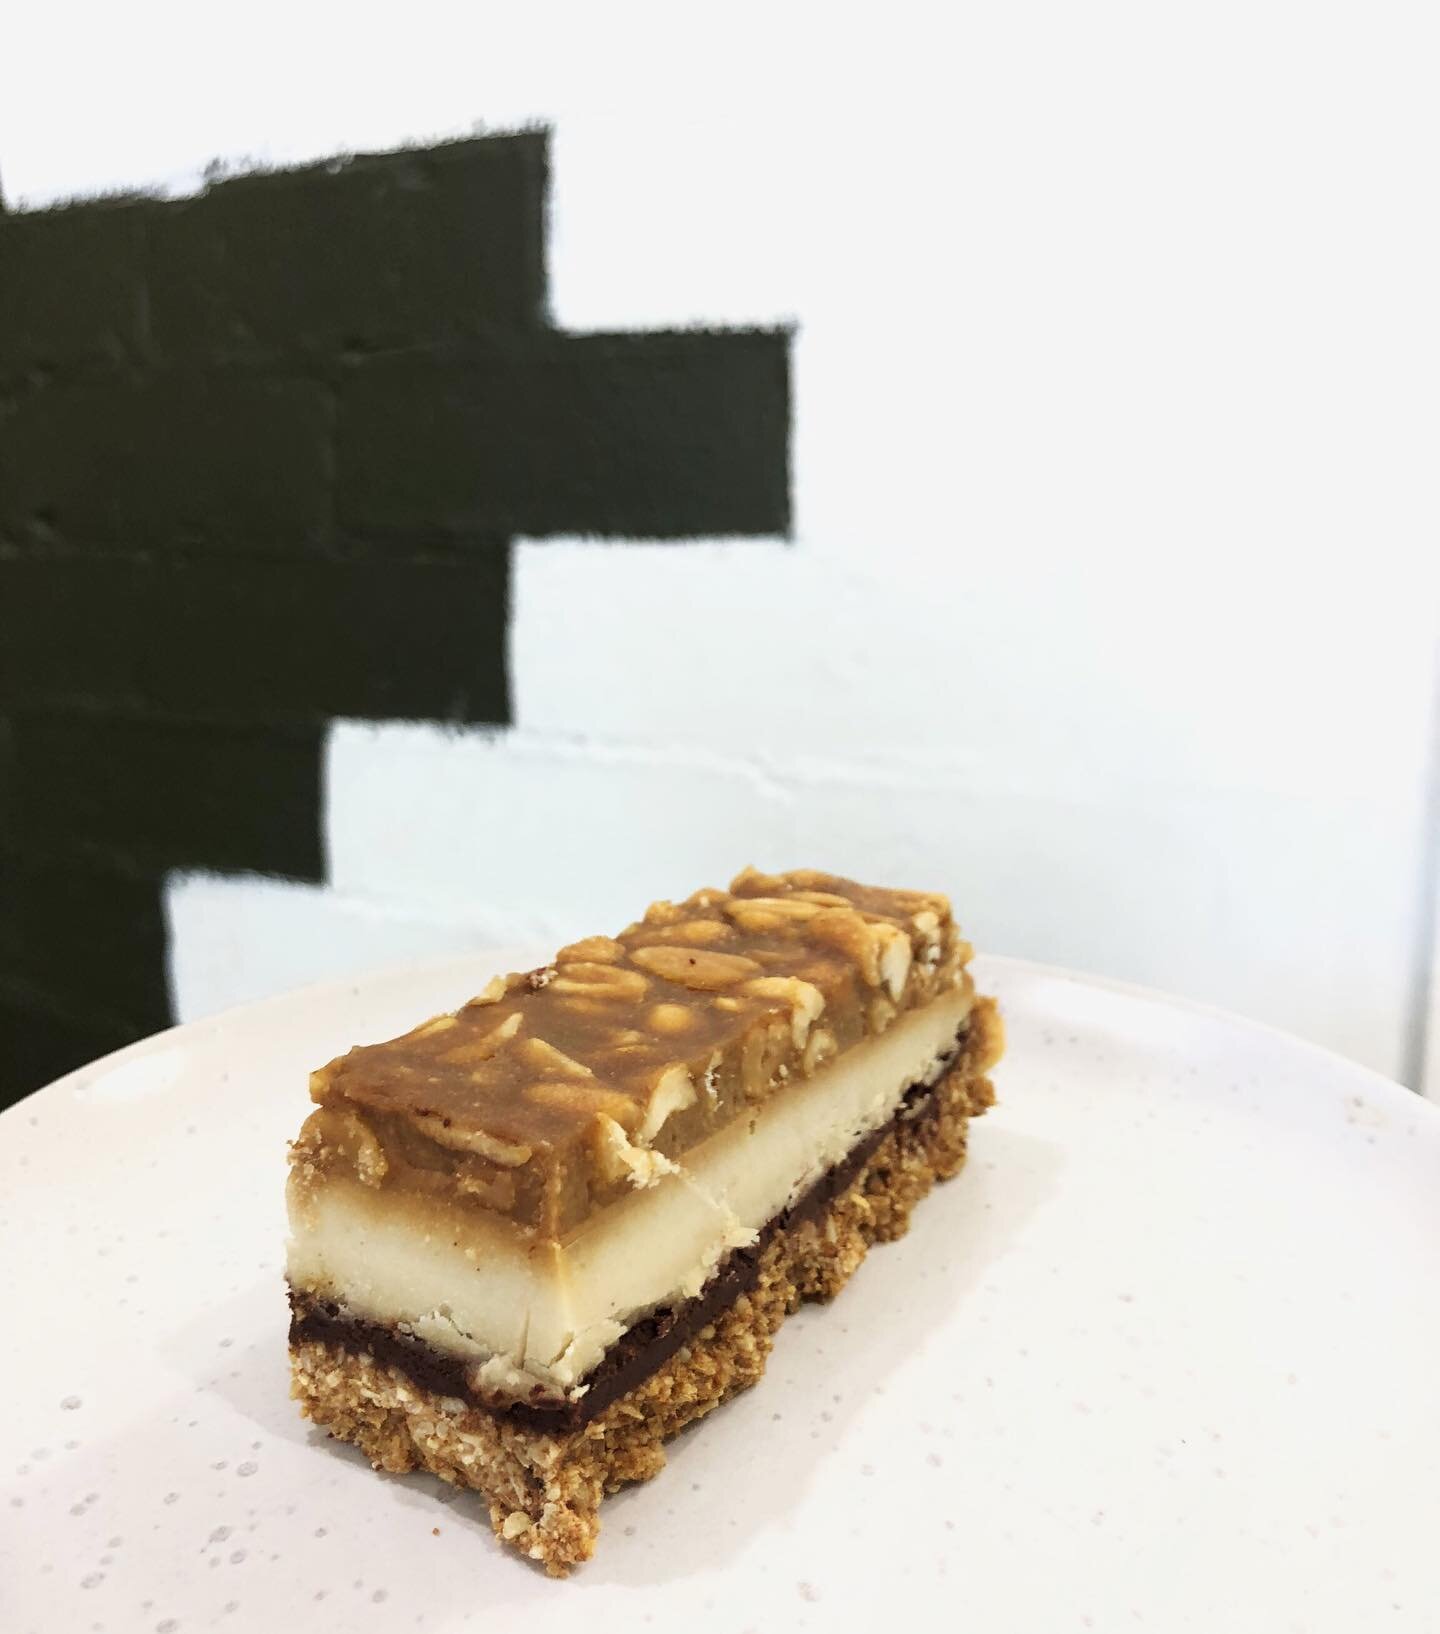 🍰 RAW Organic &bdquo;Sneaky Snickers&ldquo; slice made by @creamfork
Enjoy this treat with no guilt, it&rsquo;s made with NO sugar and is gluten free. 
Nutty, creamy, delicious 😋 

#rawtreat #allgoodthings #cafe #peanuts #sneakysnickers #cafe #cake